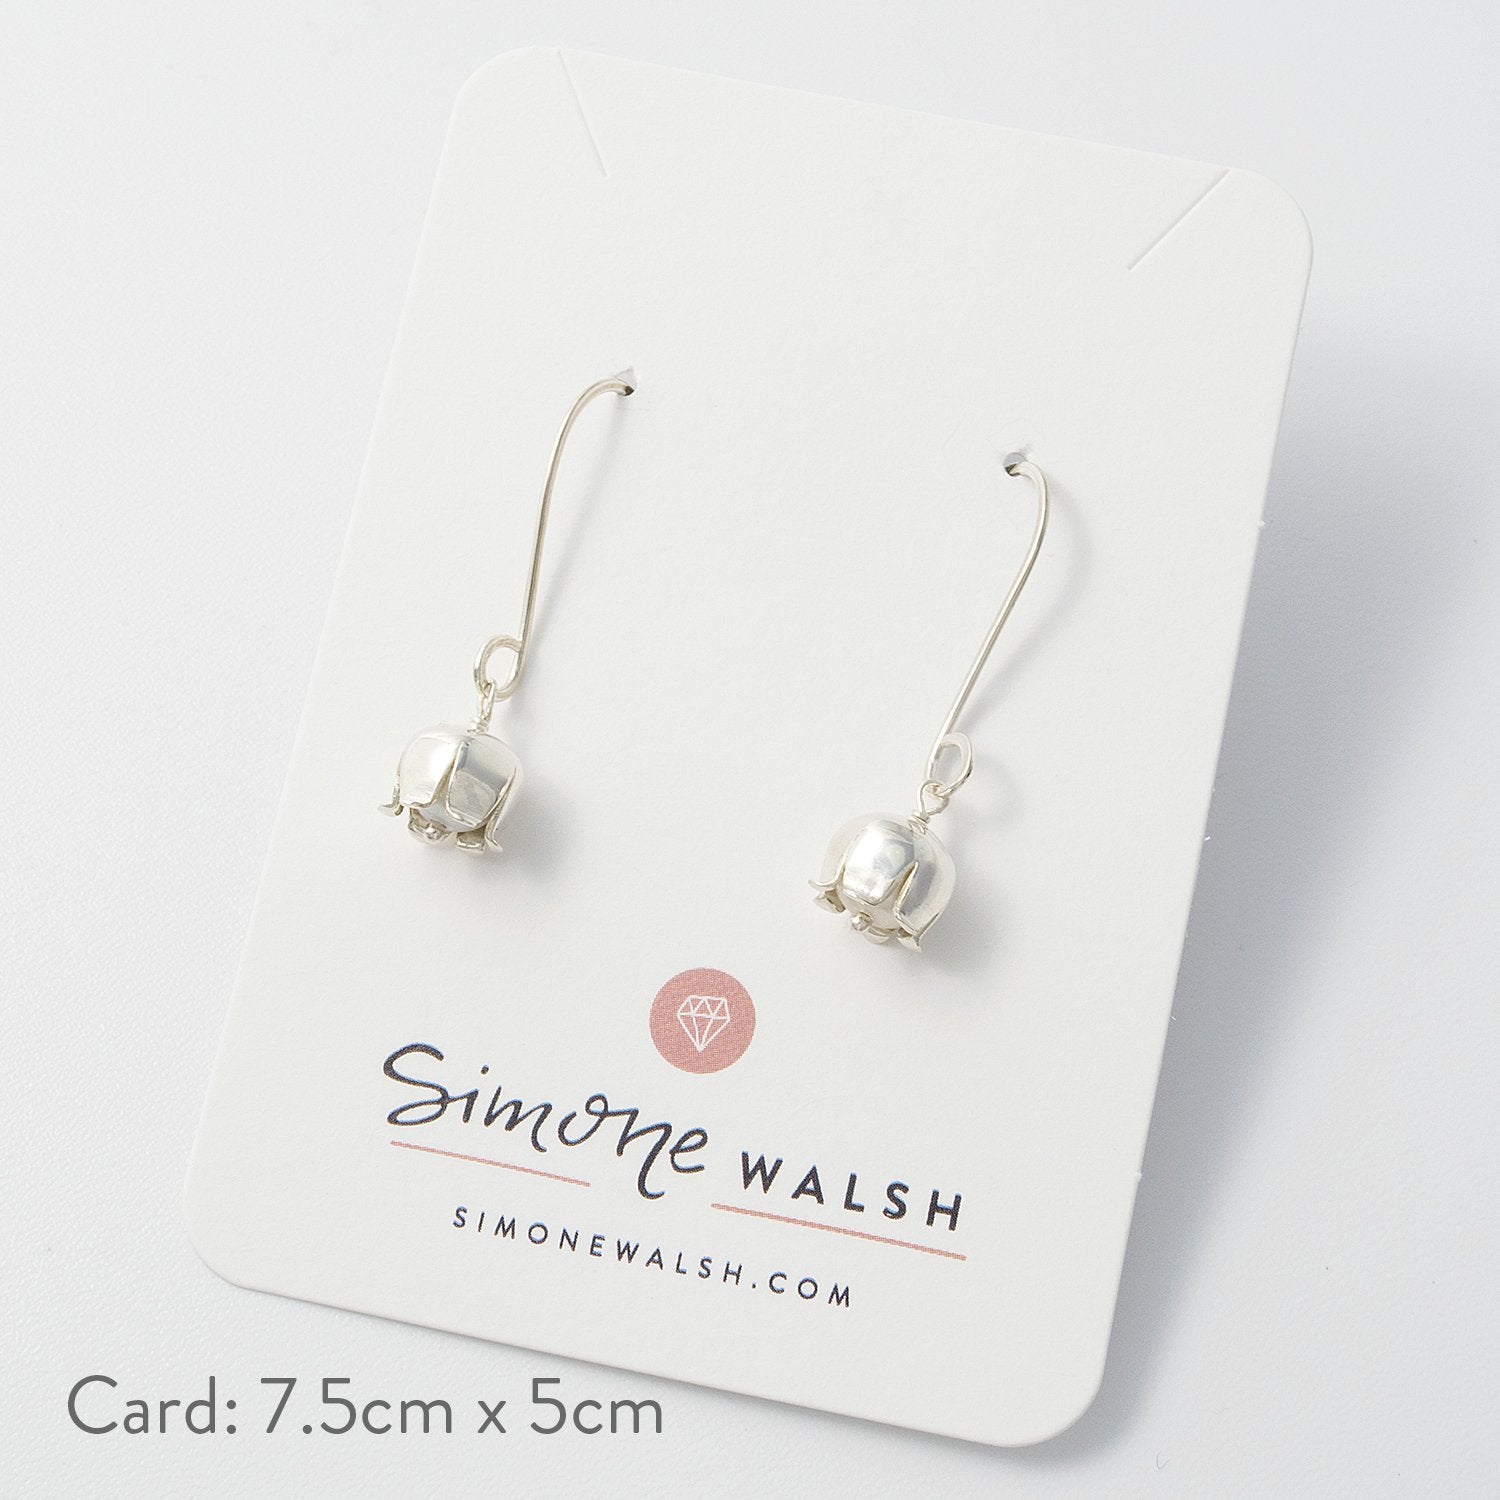 Lily of the valley earrings - Simone Walsh Jewellery Australia